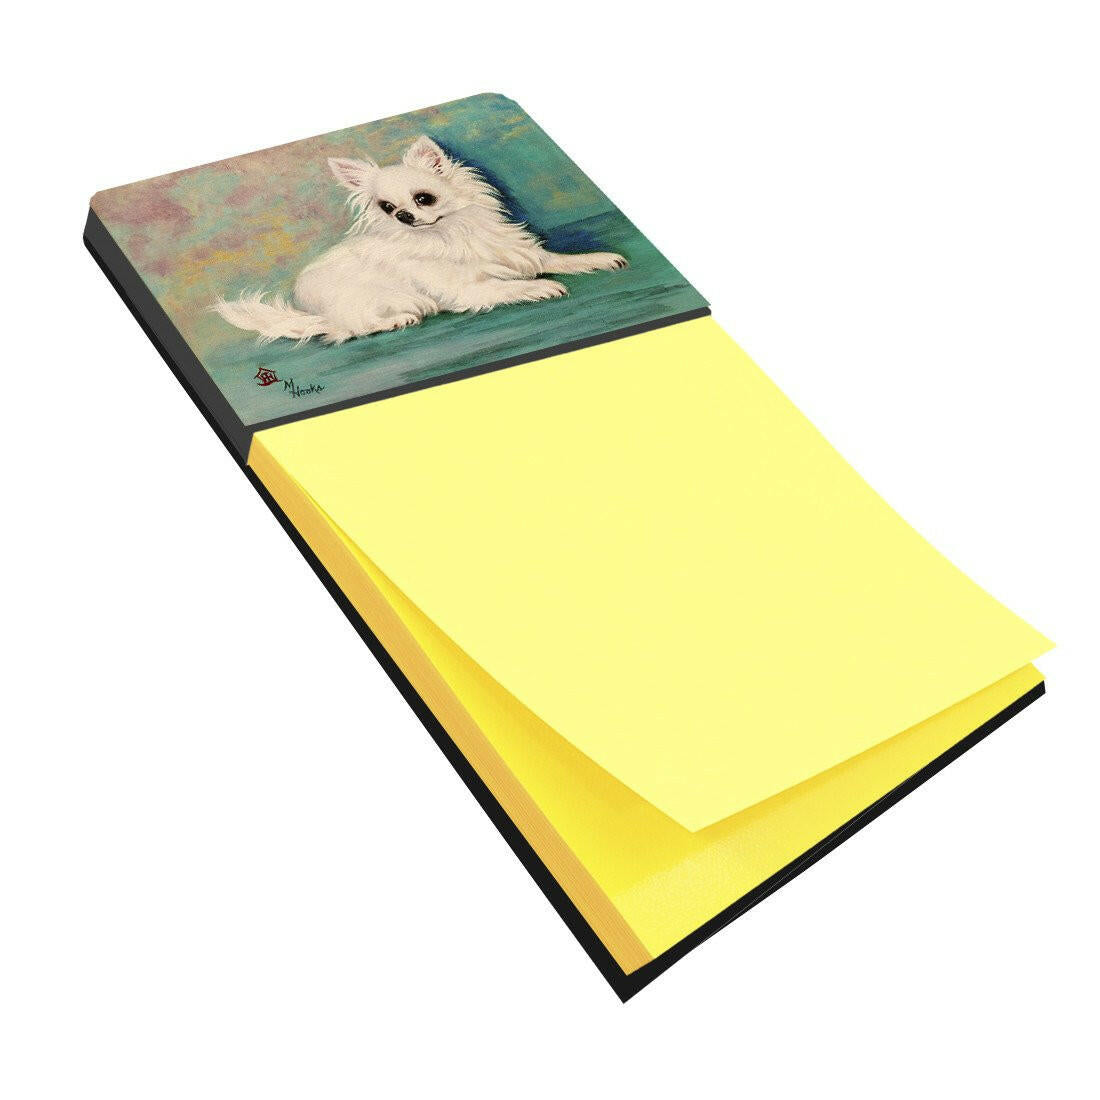 Chihuahua Queen Mother Sticky Note Holder MH1057SN by Caroline's Treasures